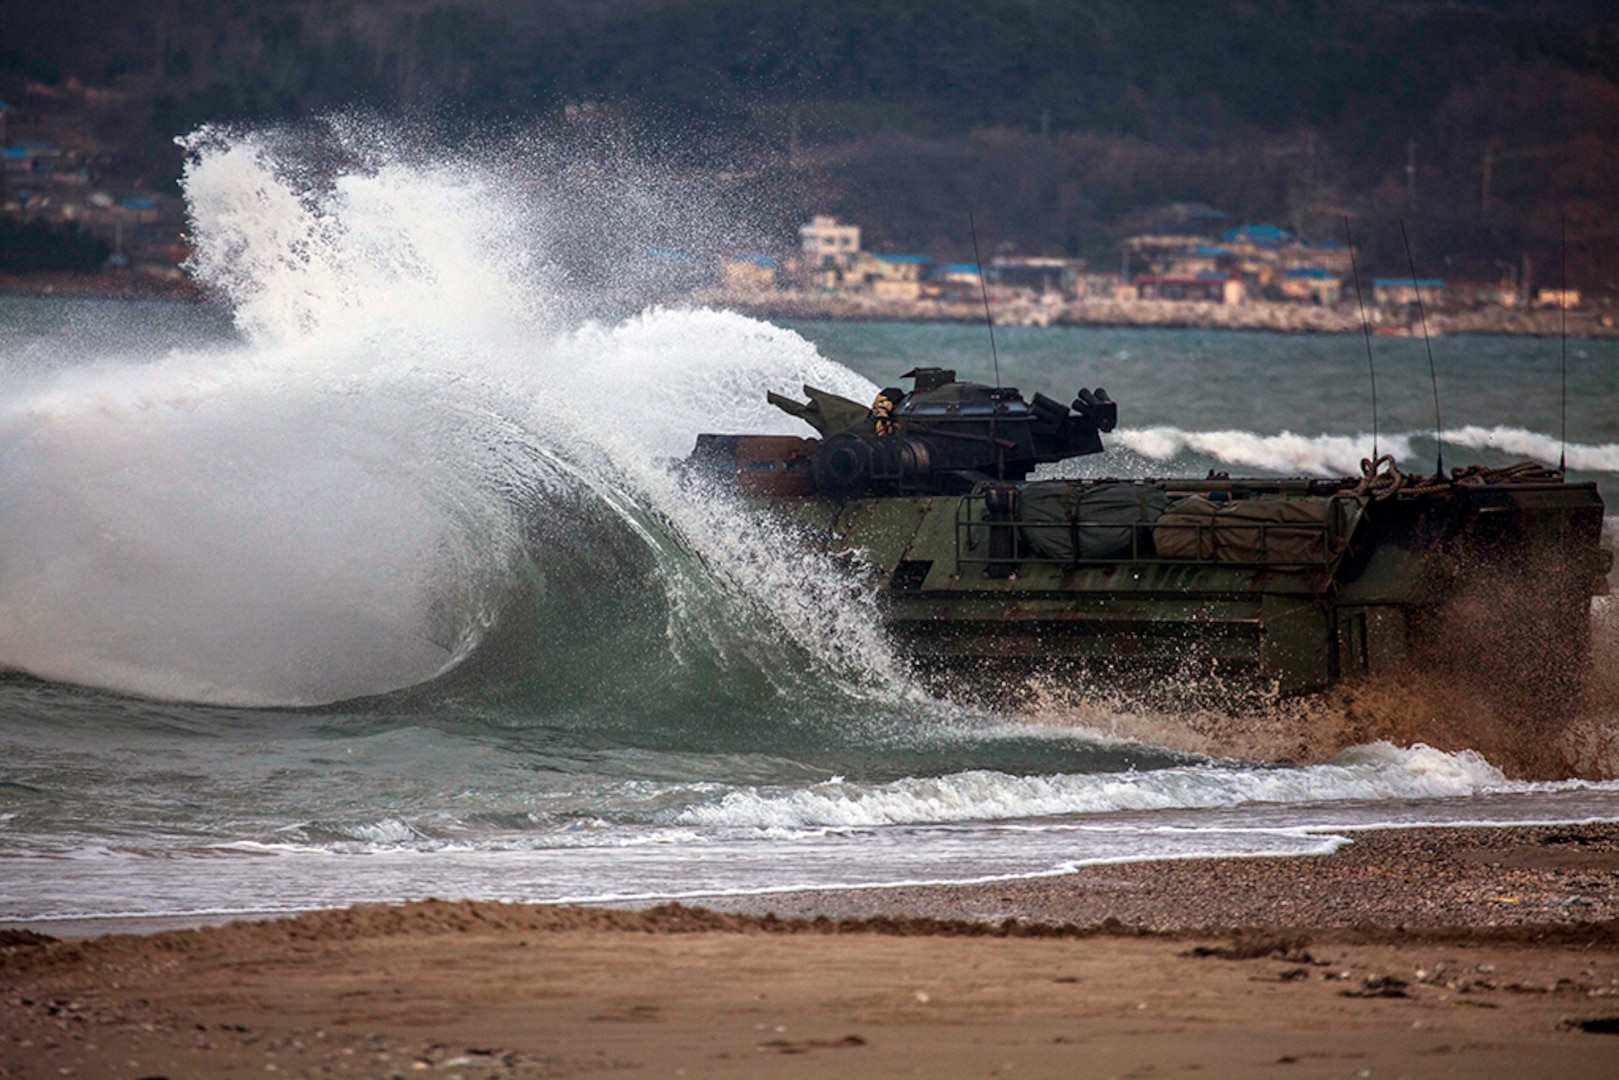 A U.S. Marine Corps Amphibious Assault Vehicle assigned to Battalion Landing Team 1st Battalion, 5th Marines, 31st Marine Expeditionary Unit enters the water after conducting an amphibious assault rehearsal during Exercise Ssang Yong 16, Dogu Beach, Pohang, Republic of Korea, Mar. 10, 2016. The U.S. Navy and Marine Corps team is committed to the ROK-U.S. Alliance and conduct exercises regularly to ensure interoperability and maintain strong working relationships to support the sovereignty of the ROK.  Ssang Yong familiarizes American armed forces with the Korean Peninsula and builds upon the strong preexisting relationship between the two militaries.  The Marines and sailors of the 31st MEU are currently deployed aboard the Bonhomme Richard Amphibious Ready Group as part of their spring deployment of the Asia-Pacific region. (U.S. Marine Corps Photo by GySgt Ismael Pena/Released)